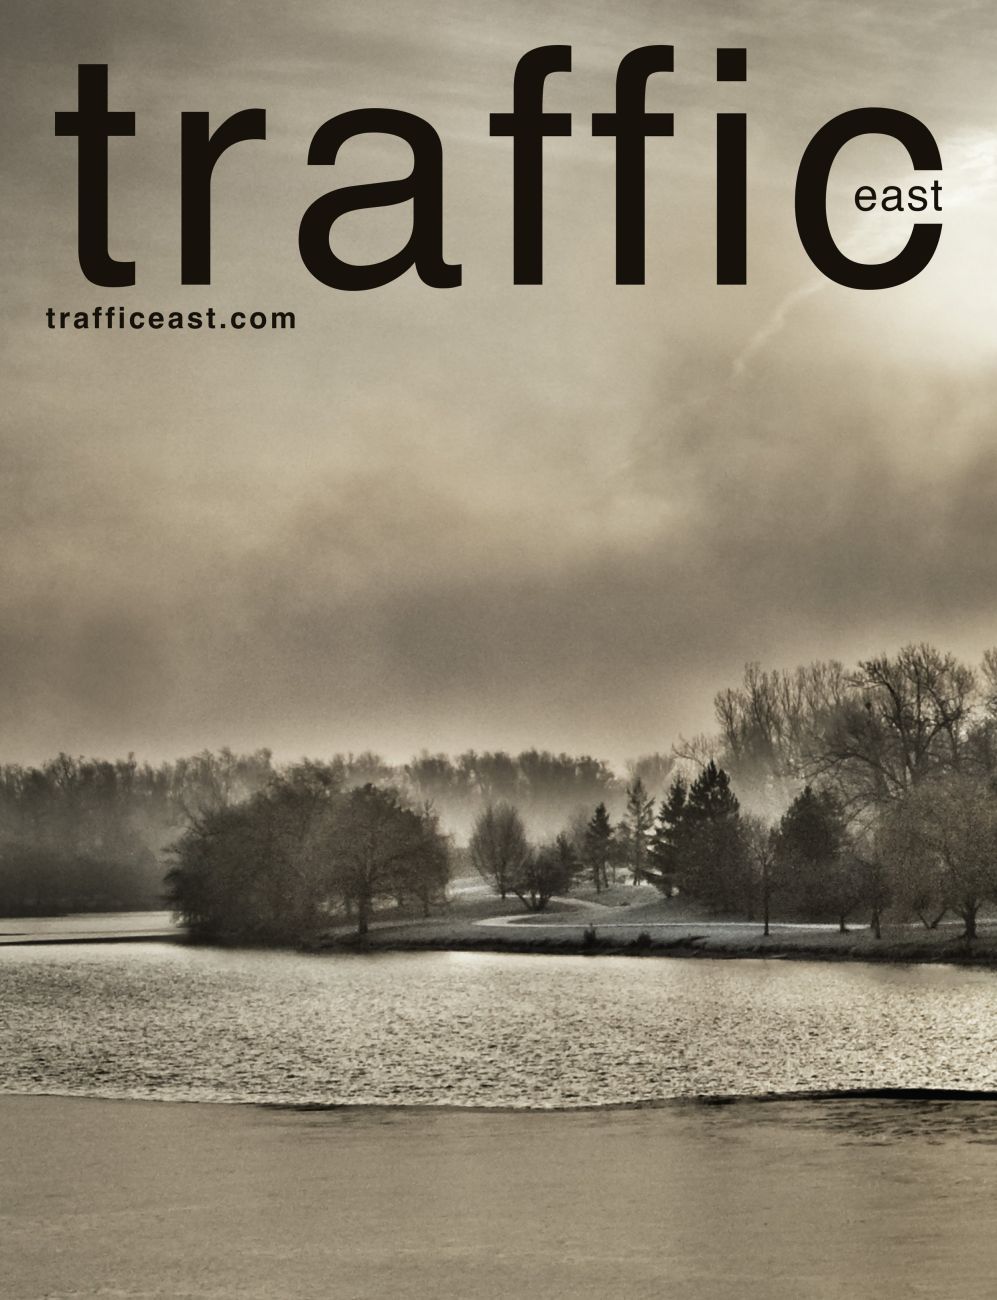 Cover of Traffic East magazine